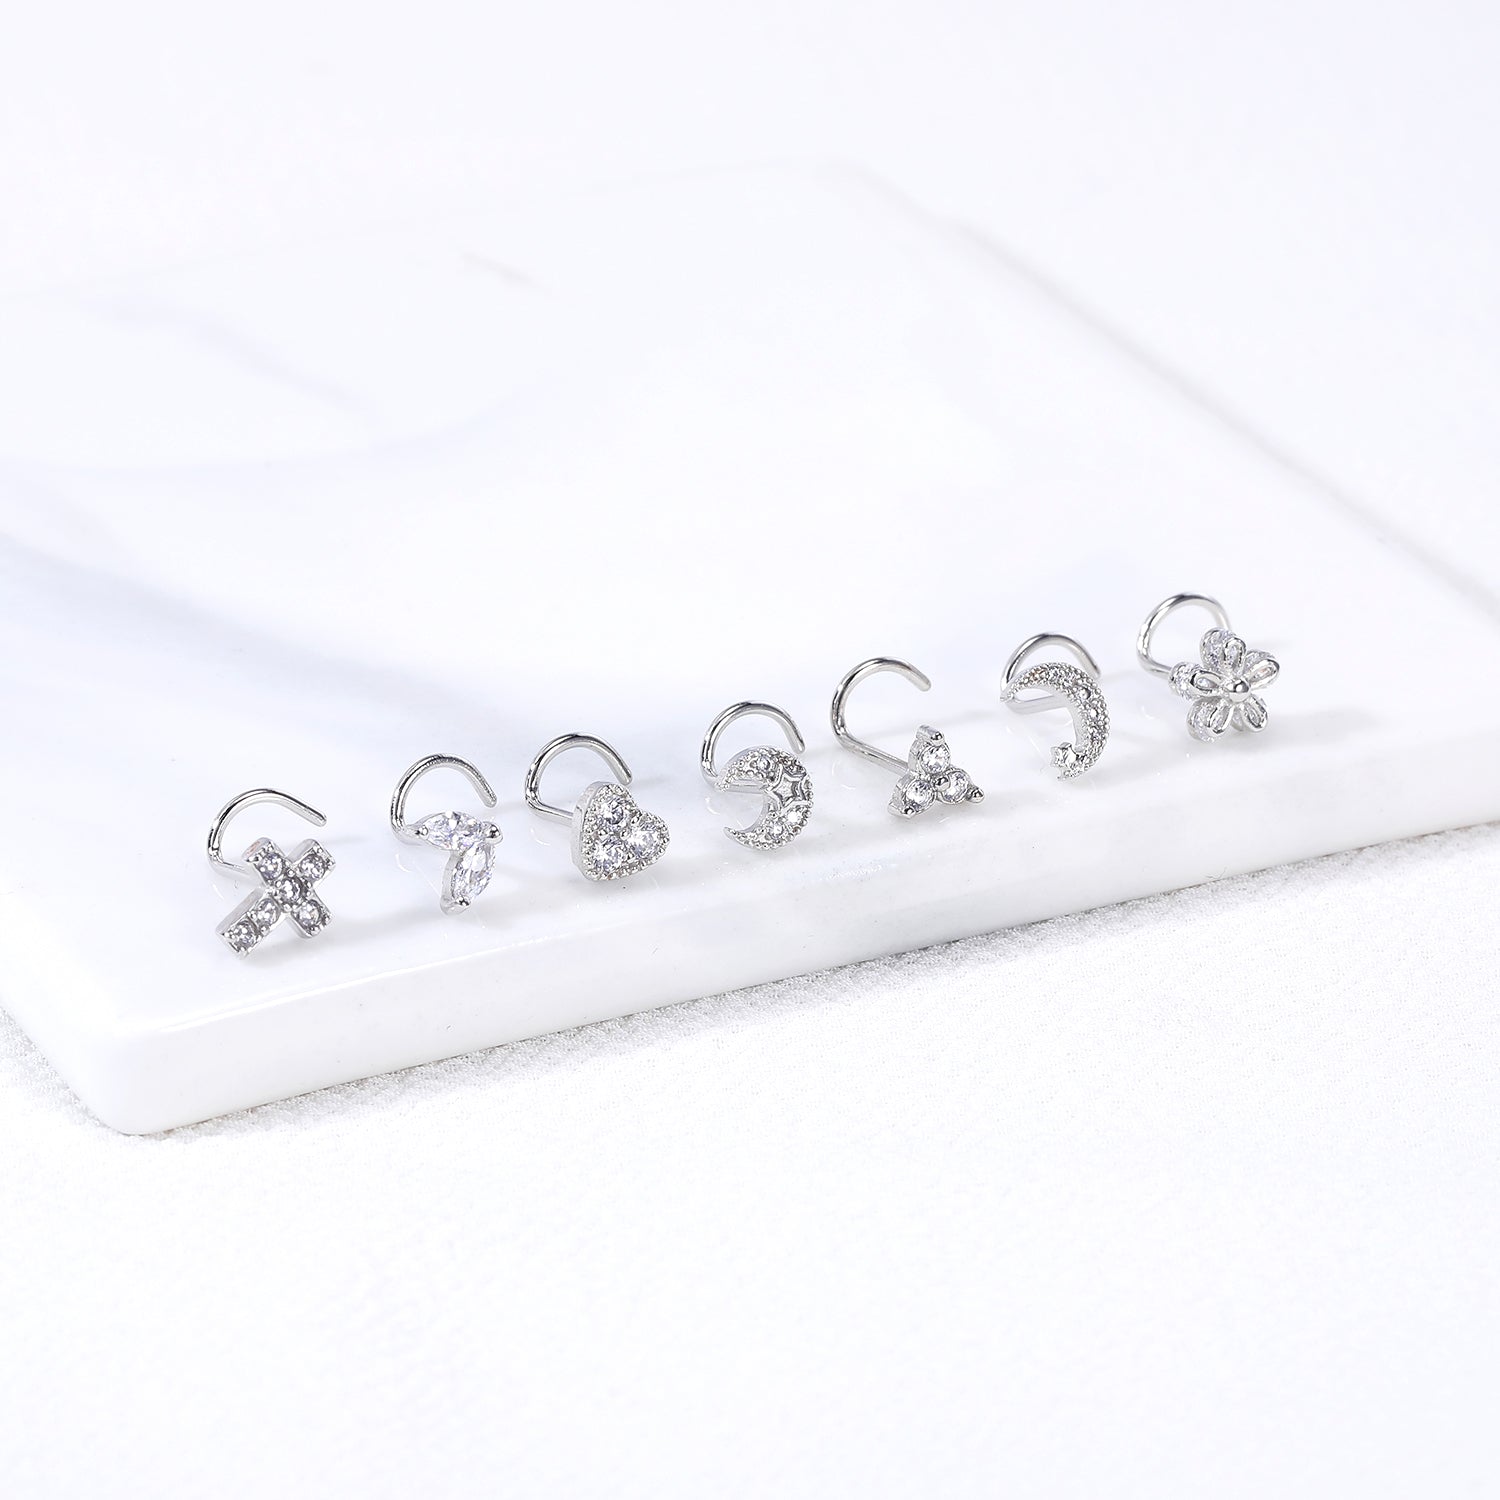 20G-Cross-White-Crystal-Nose-Studs-Piercing-Crokscrew-Nose-Rings-Stainless-Steel-Nostril-Piercing